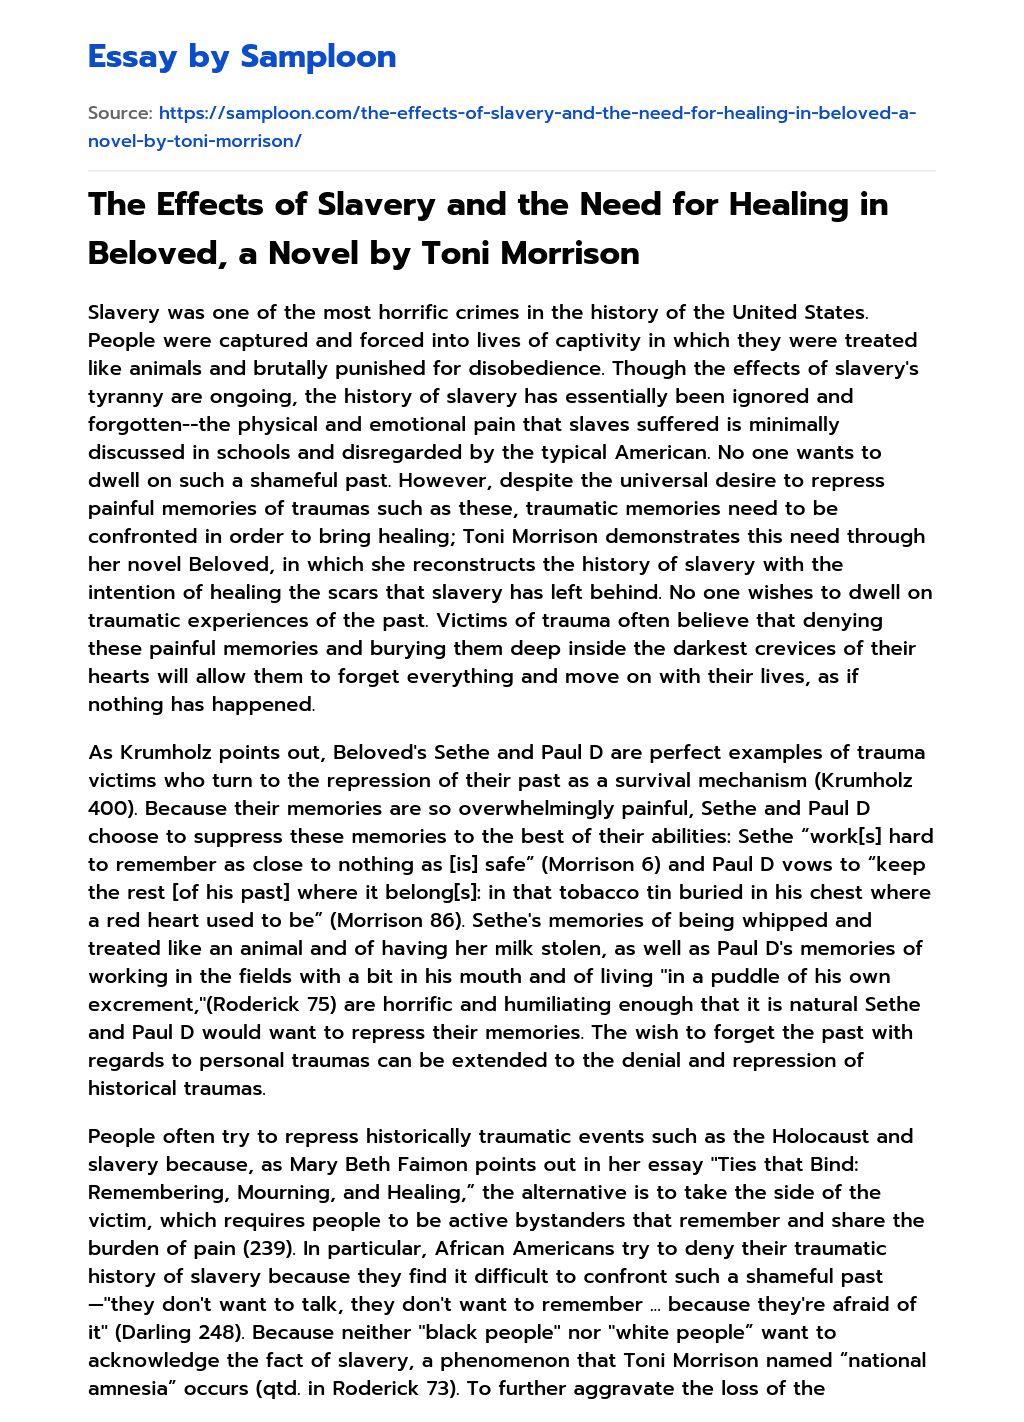 The Effects of Slavery and the Need for Healing in Beloved, a Novel by Toni Morrison essay